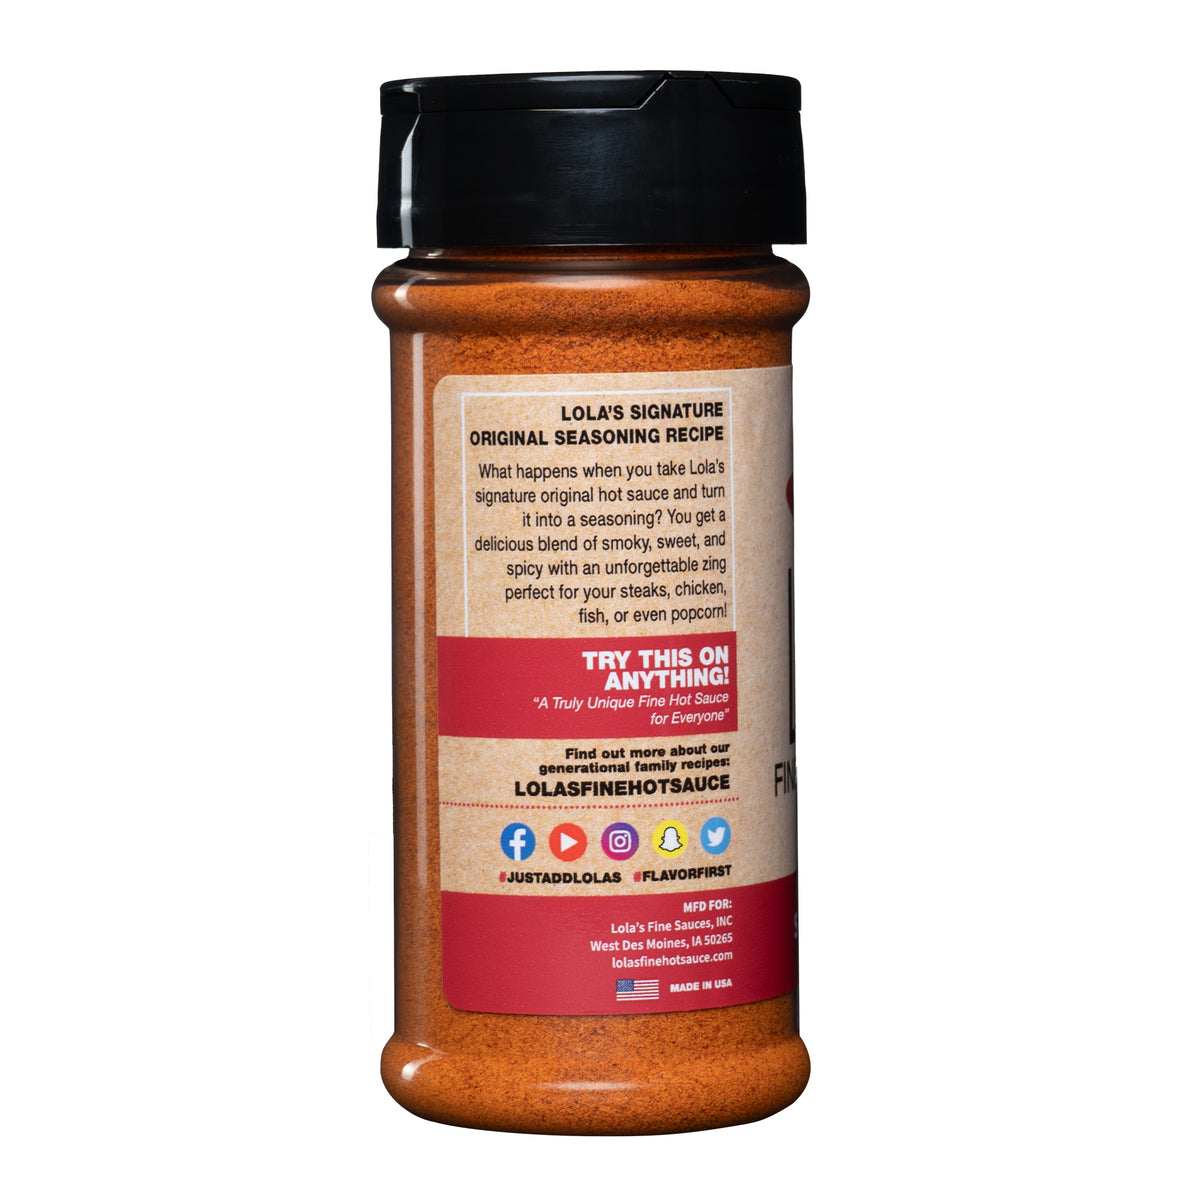 Lola's Original Seasoning: A jar of smoky, sweet, and spicy seasoning with a lime zing. Perfect for steaks, chicken, fish, popcorn and more! 3.9 oz. plastic shaker.